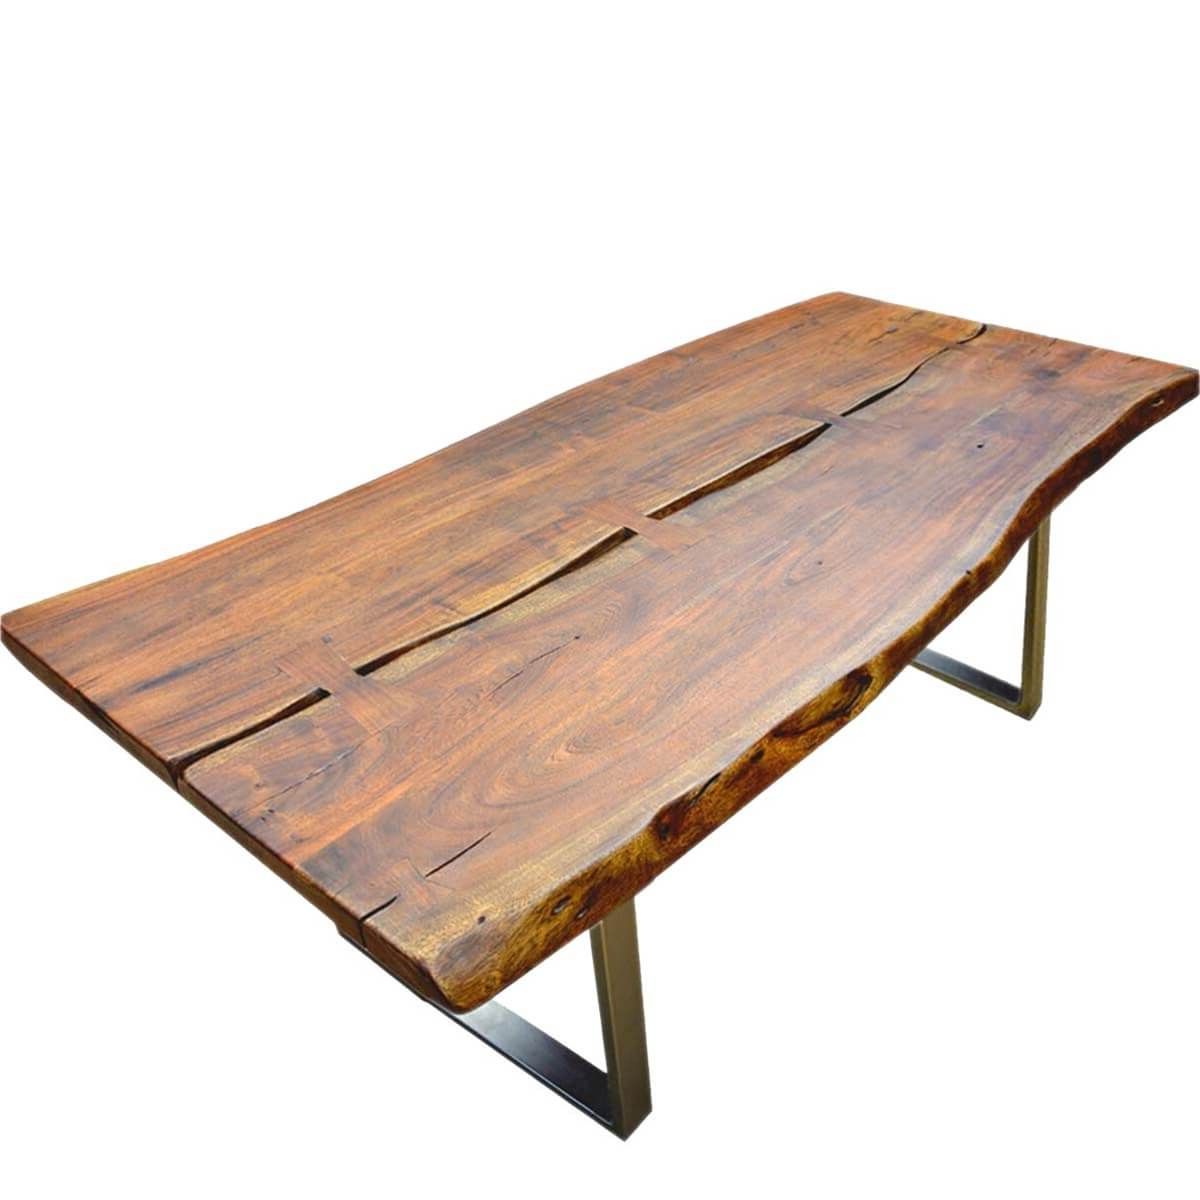 Acacia Wood Top Dining Tables With Iron Legs On Raw Metal In Famous Live Edge Acacia Wood & Iron Rustic Large Dining Table (View 9 of 30)